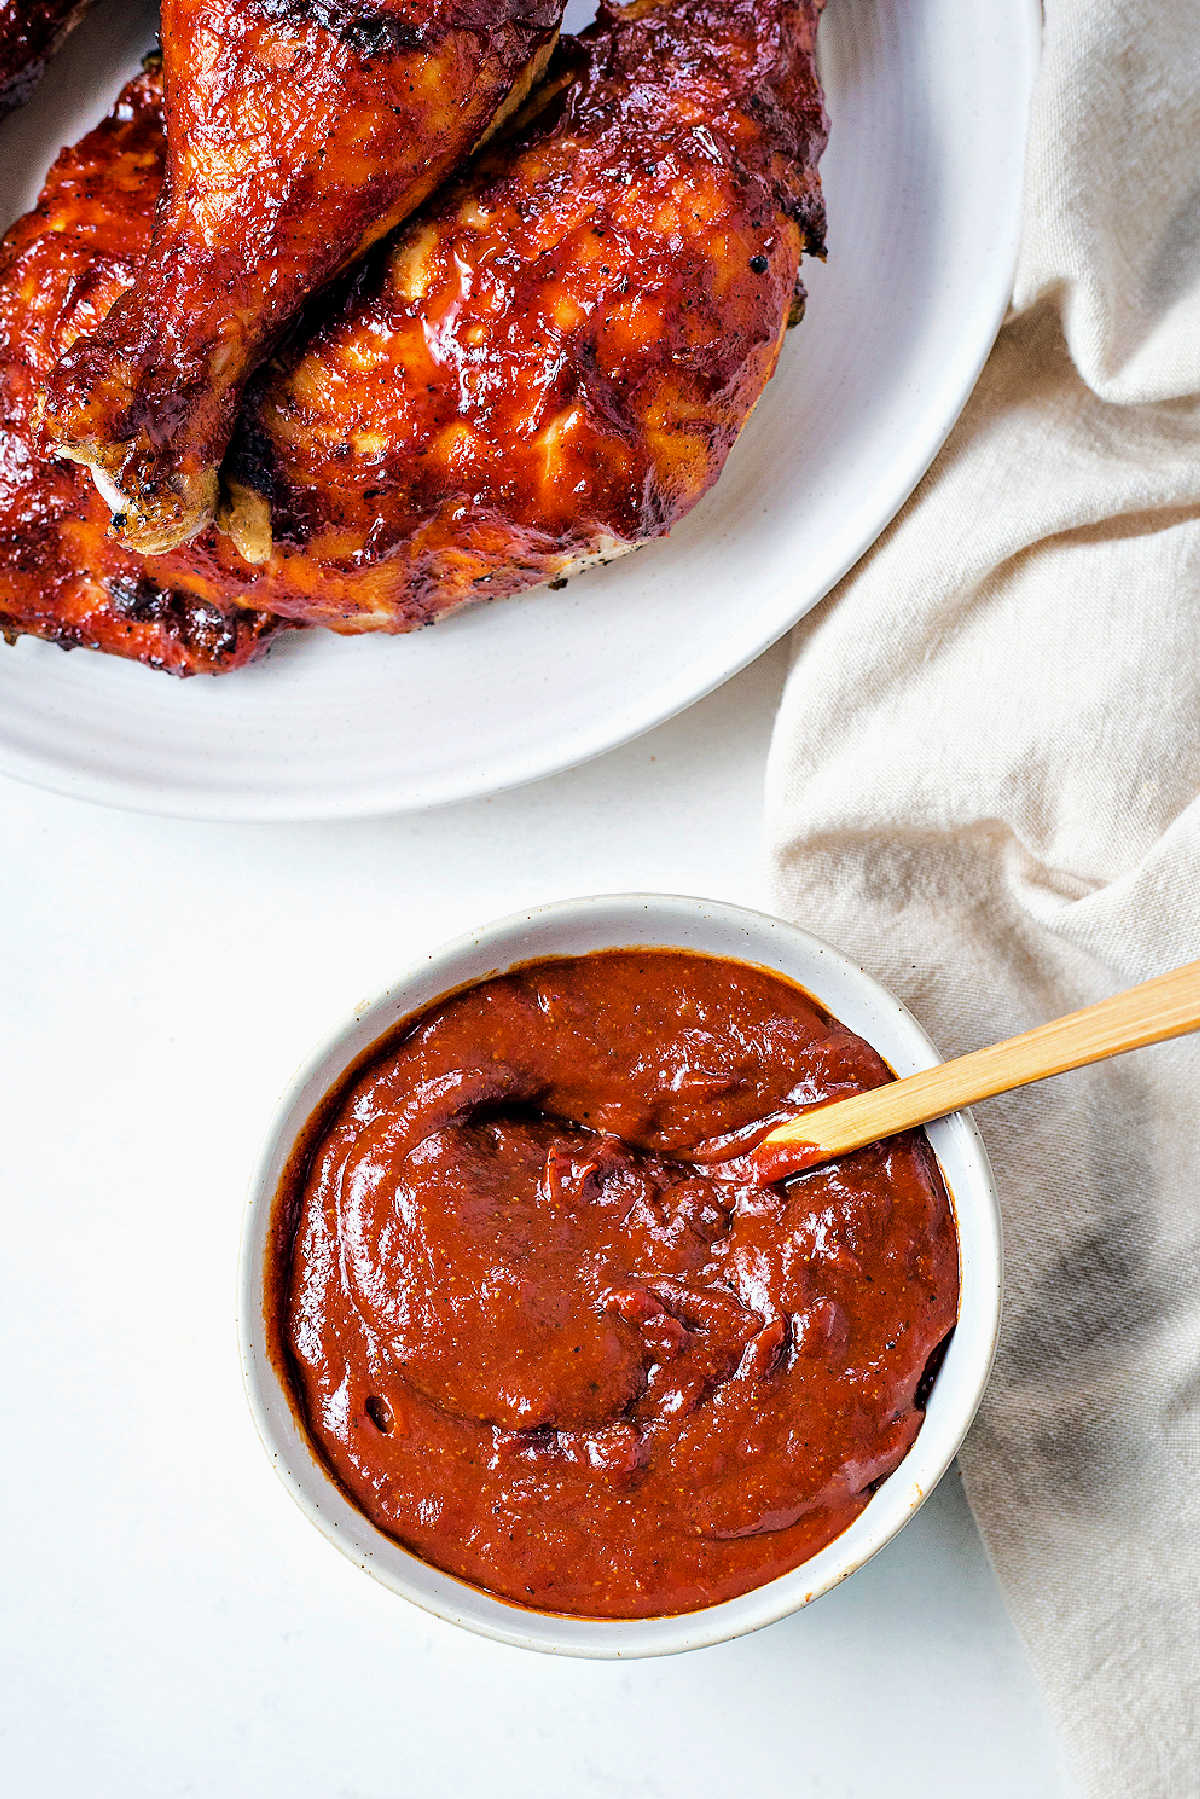 barbecue sauce in a bowl on a table with a platter of chicken in the background.